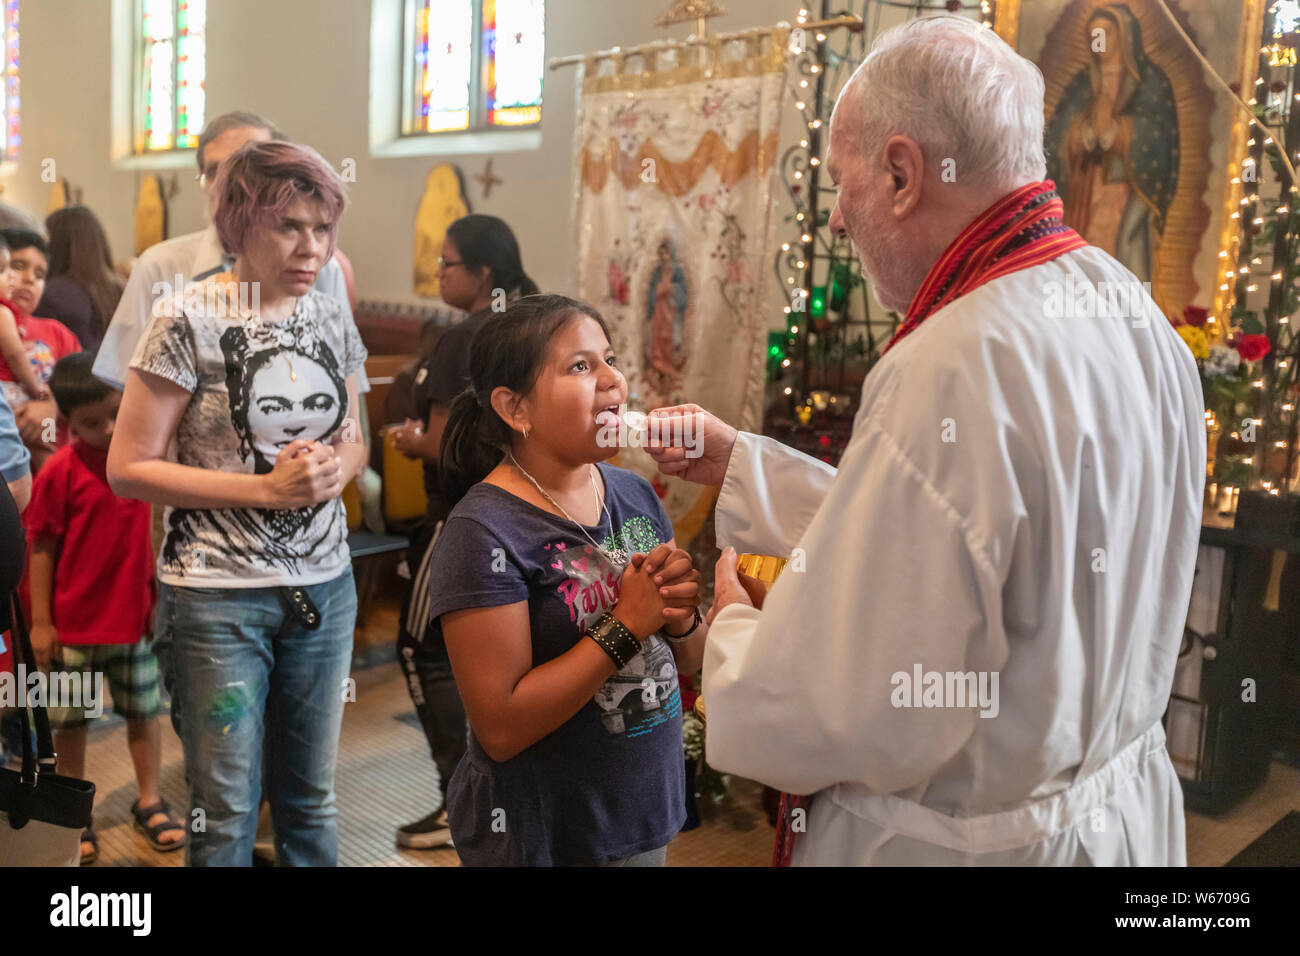 Detroit, Michigan - A Catholic mass for immigrant families that are separated or in detention. The event raised money for the Catholic Dioceses of El Stock Photo